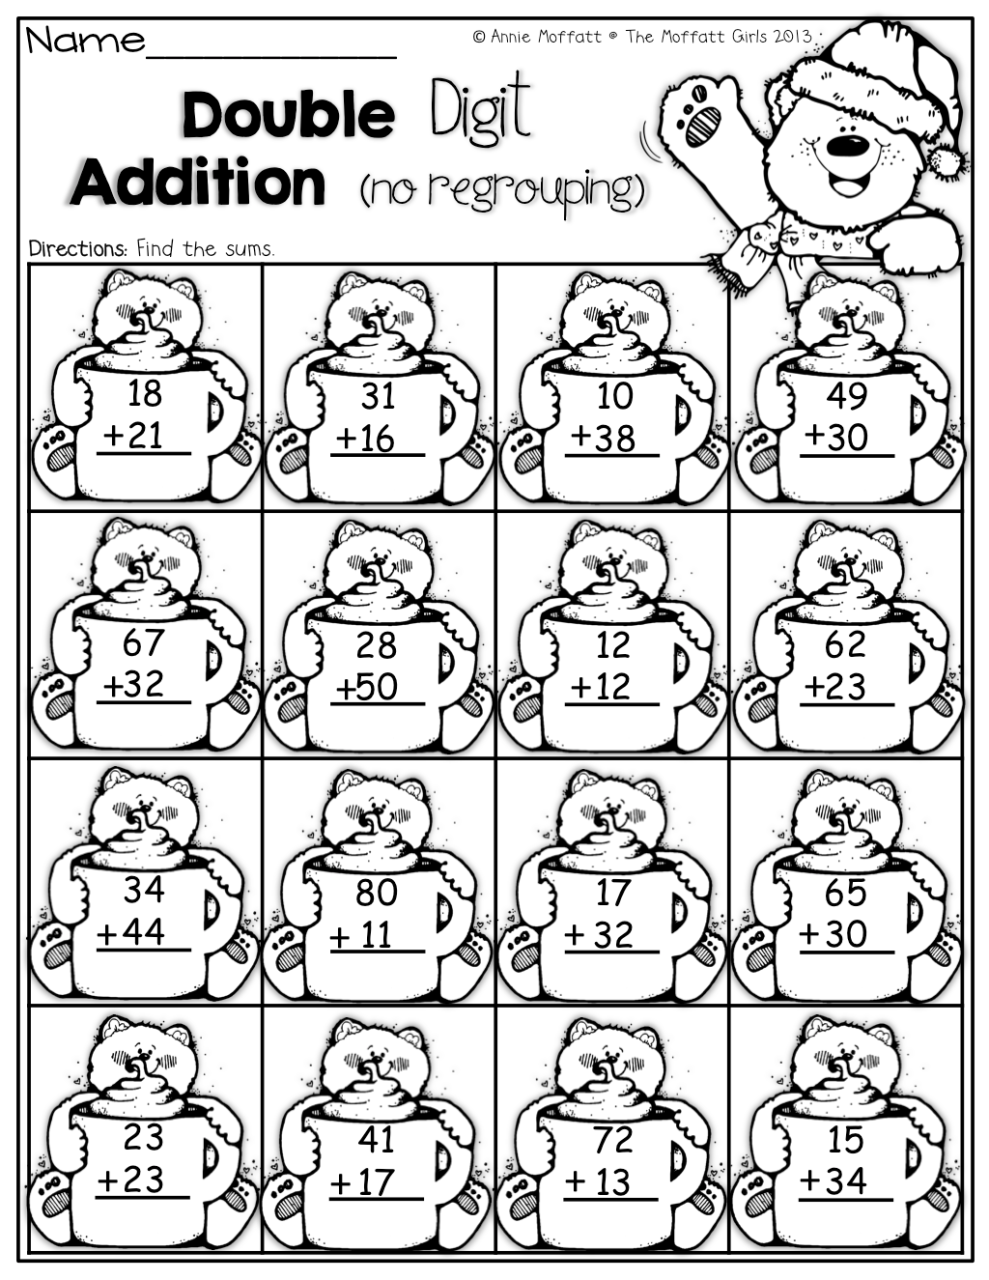 Double Digit Addition with no regrouping! 1st Grade Activities